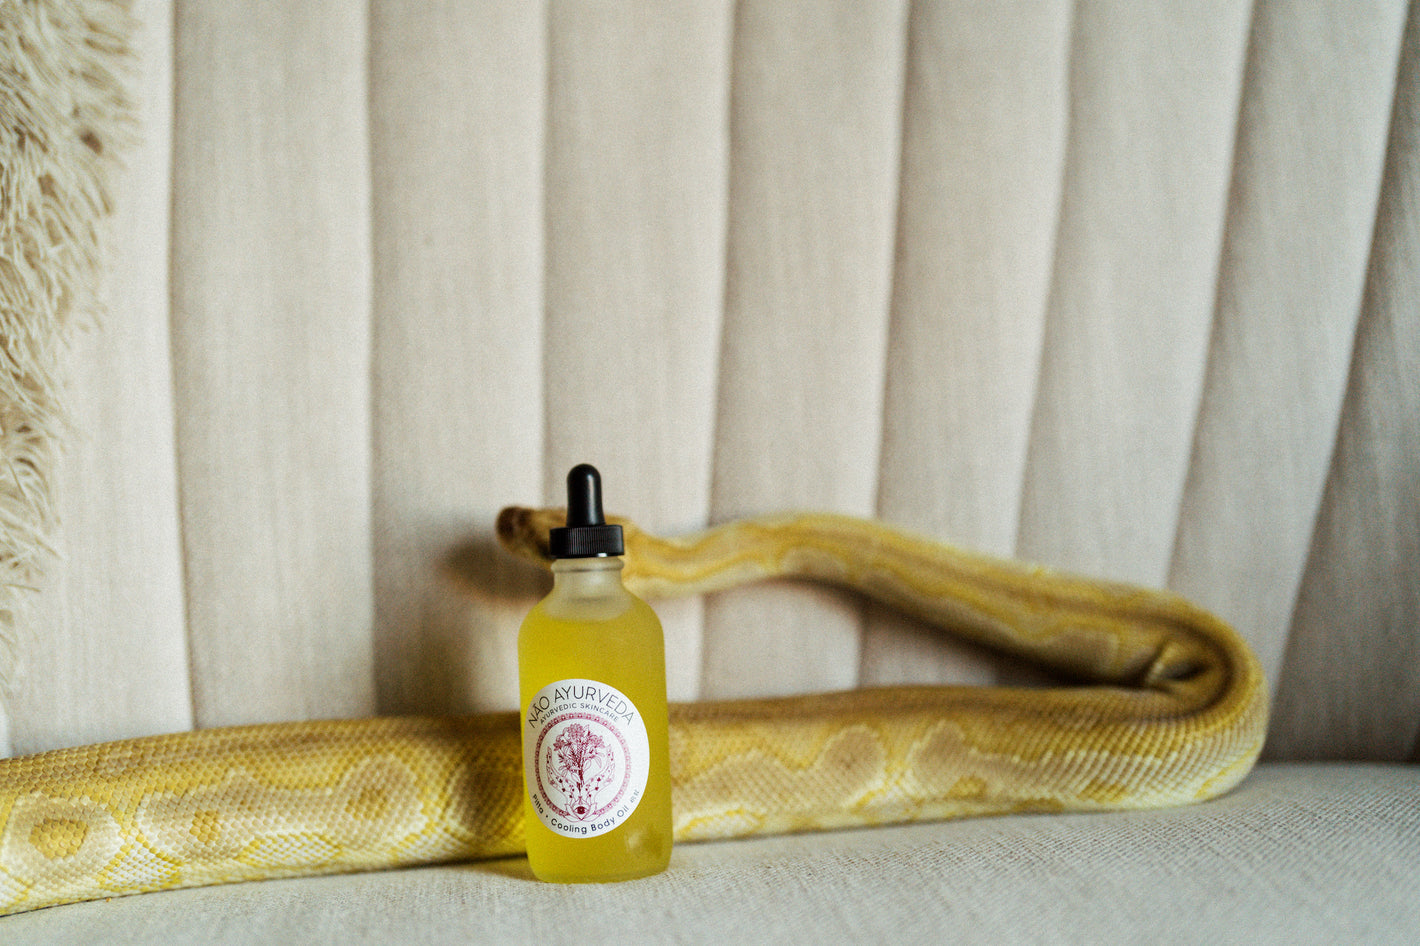 A yellow boa constrictor studies a Nao Ayurveda body oil on a beige linen couch | Image by Margaret Wroblewski for Green Revolution Studio